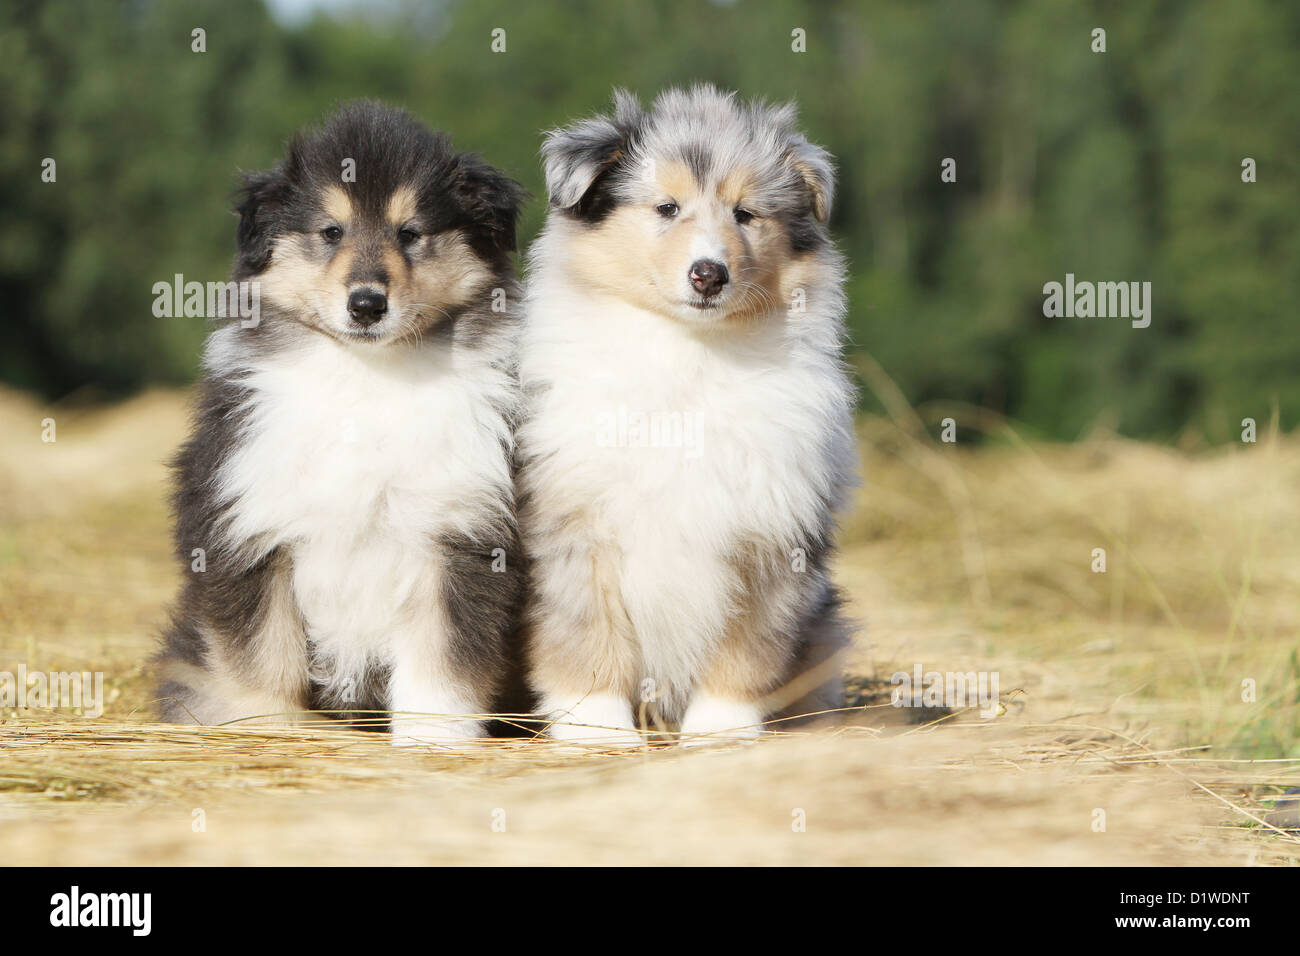 Dog Rough Collie / Scottish Collie two puppies (tricolor - blue Merle)  sitting Stock Photo - Alamy